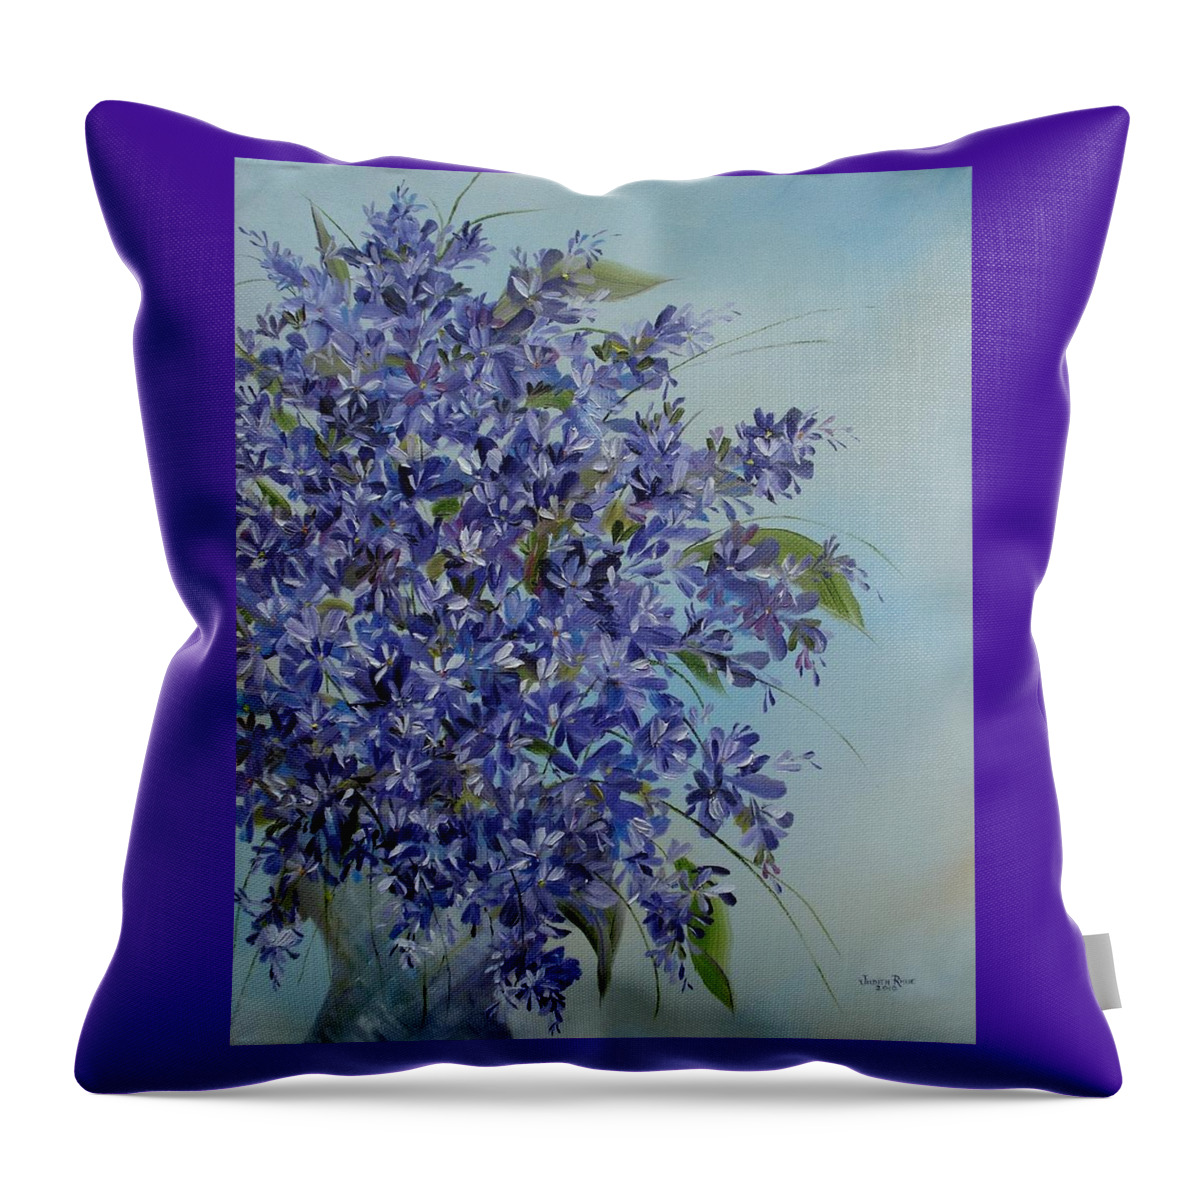 Lilacs Throw Pillow featuring the painting Lilacs by Judith Rhue